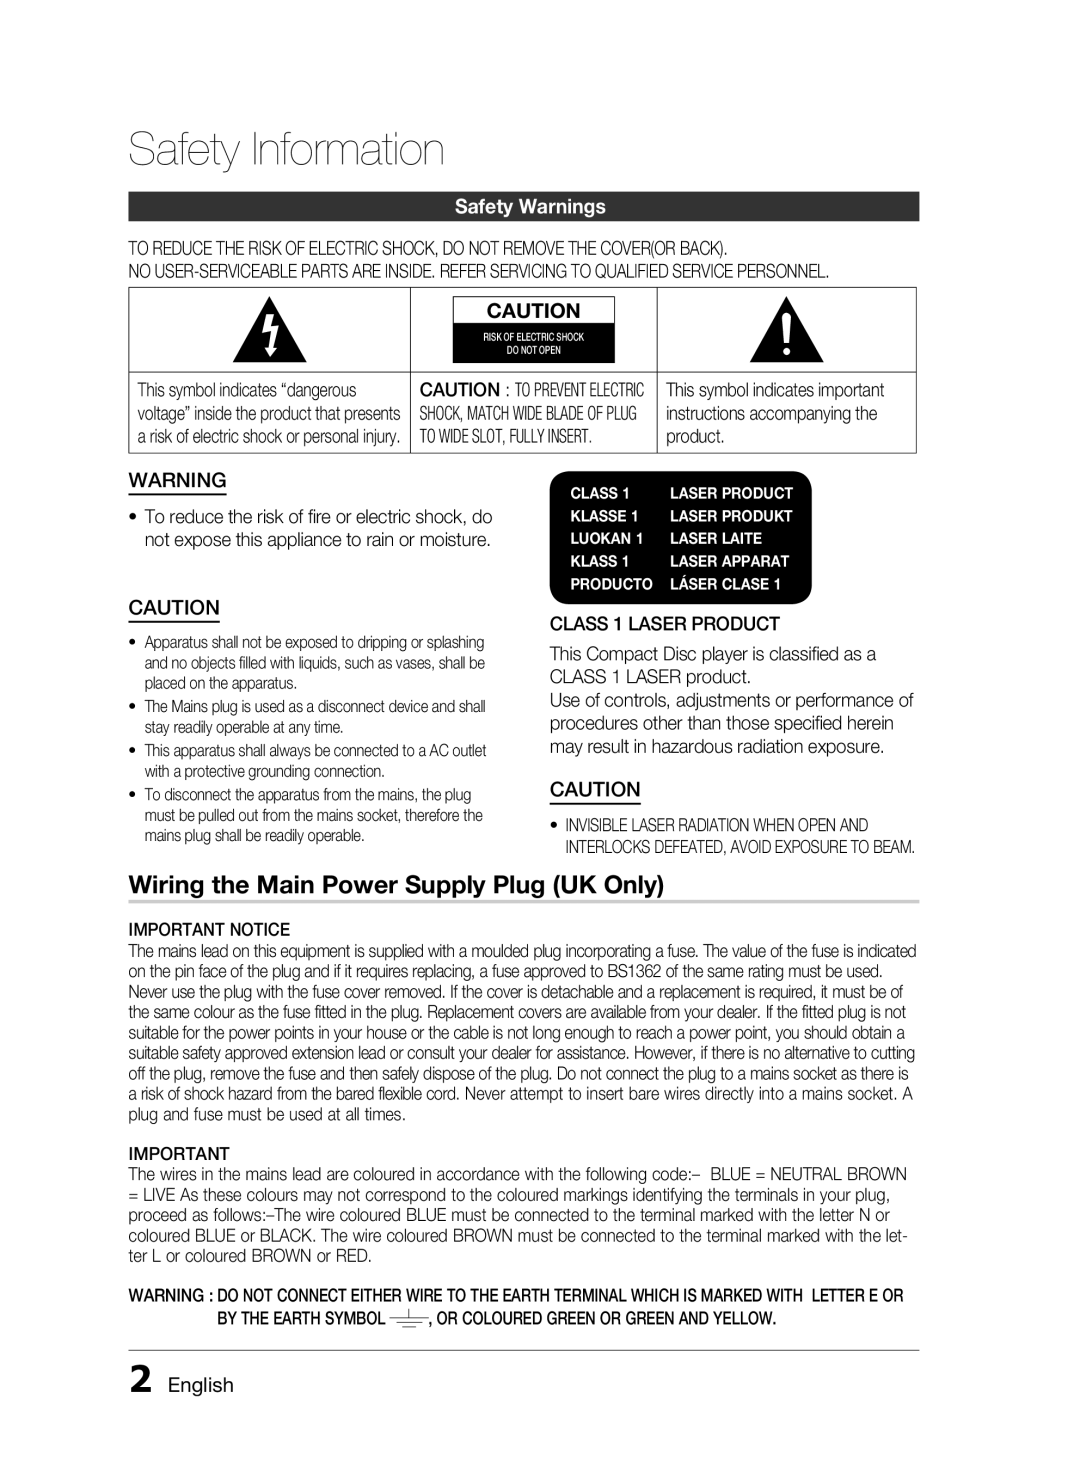 Samsung HT-C5200 user manual Safety Information, Wiring the Main Power Supply Plug UK Only, Safety Warnings, English 